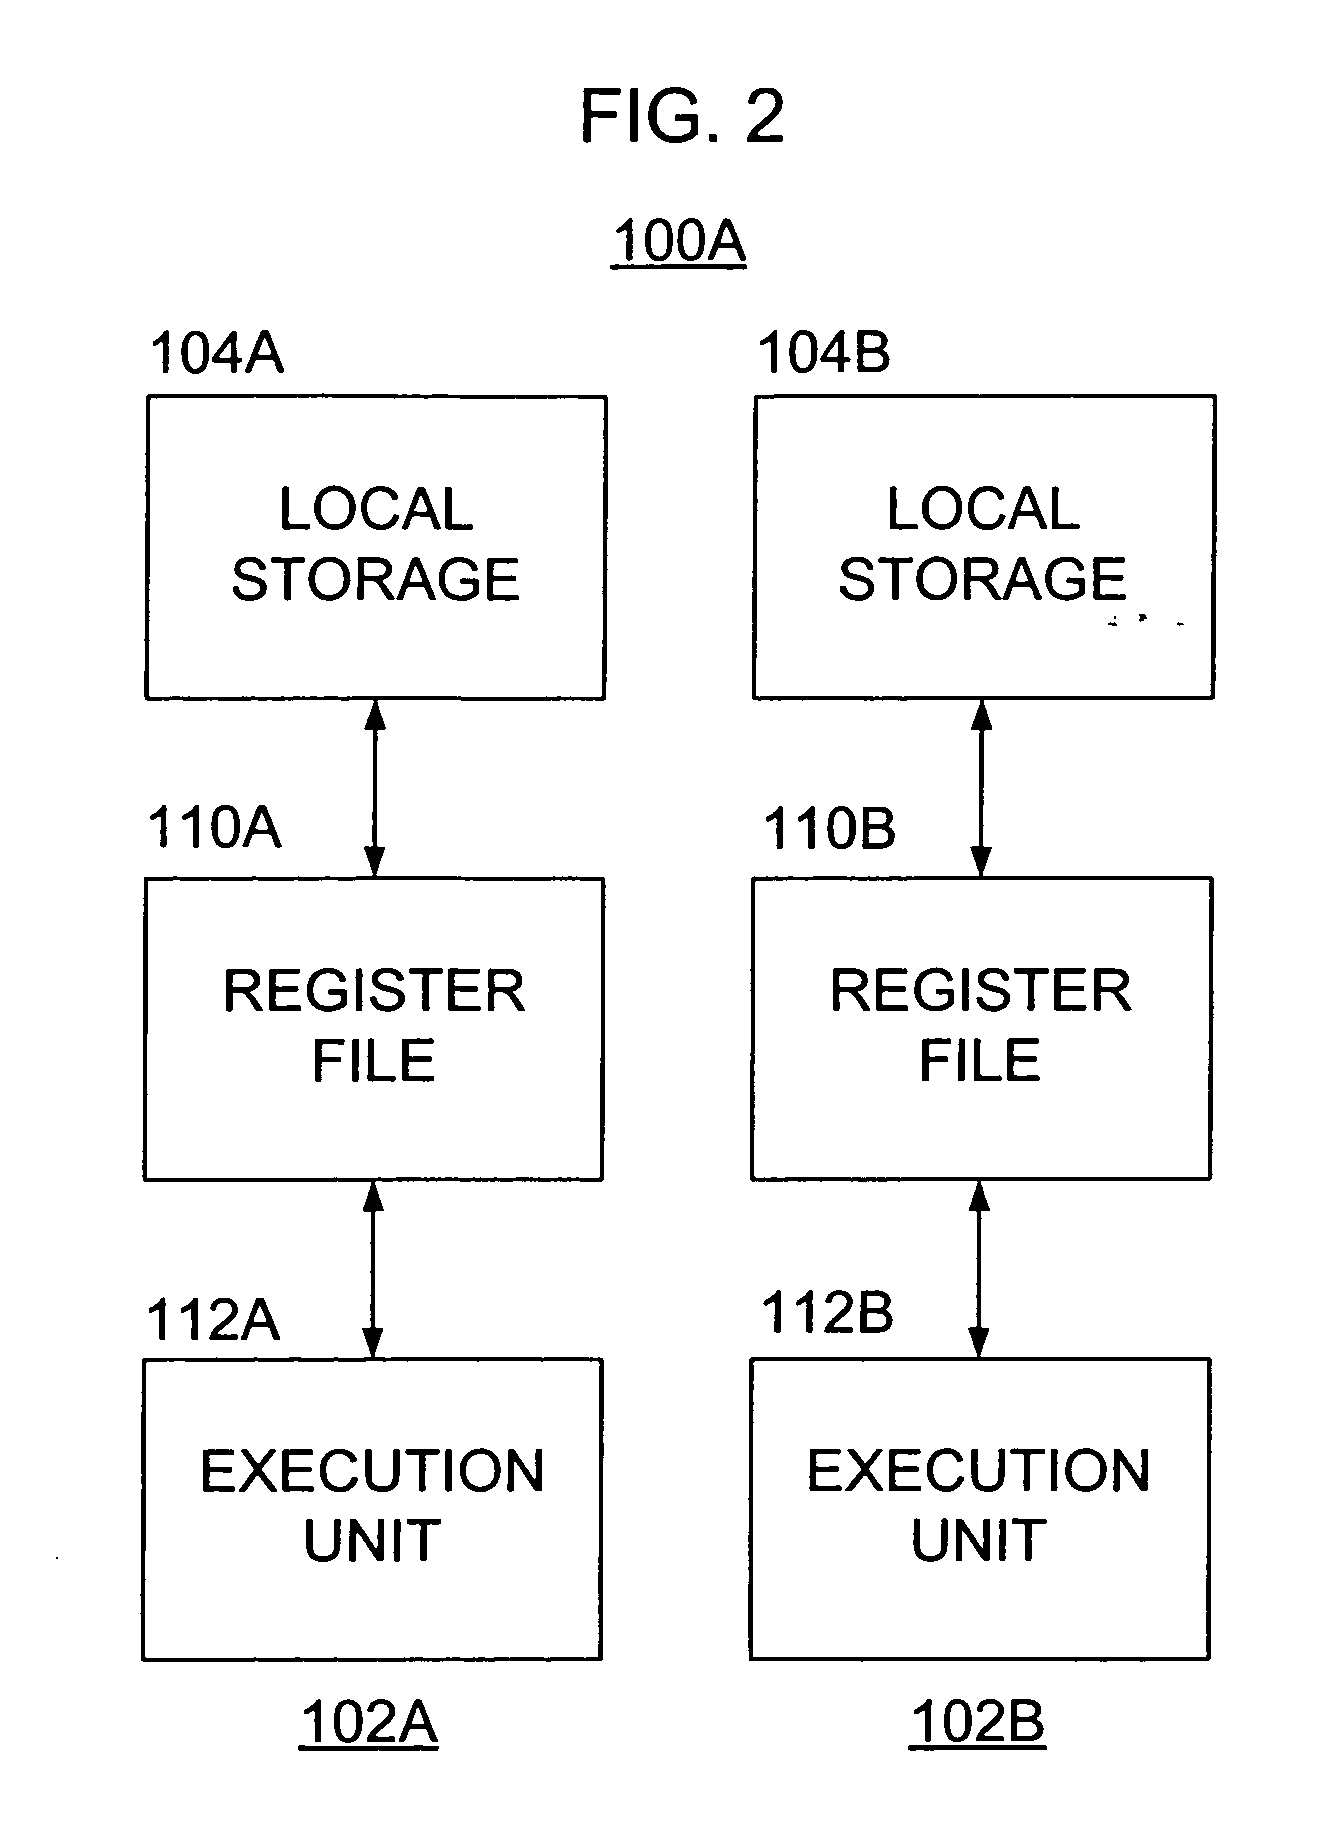 Methods and apparatus for task sharing among a plurality of processors